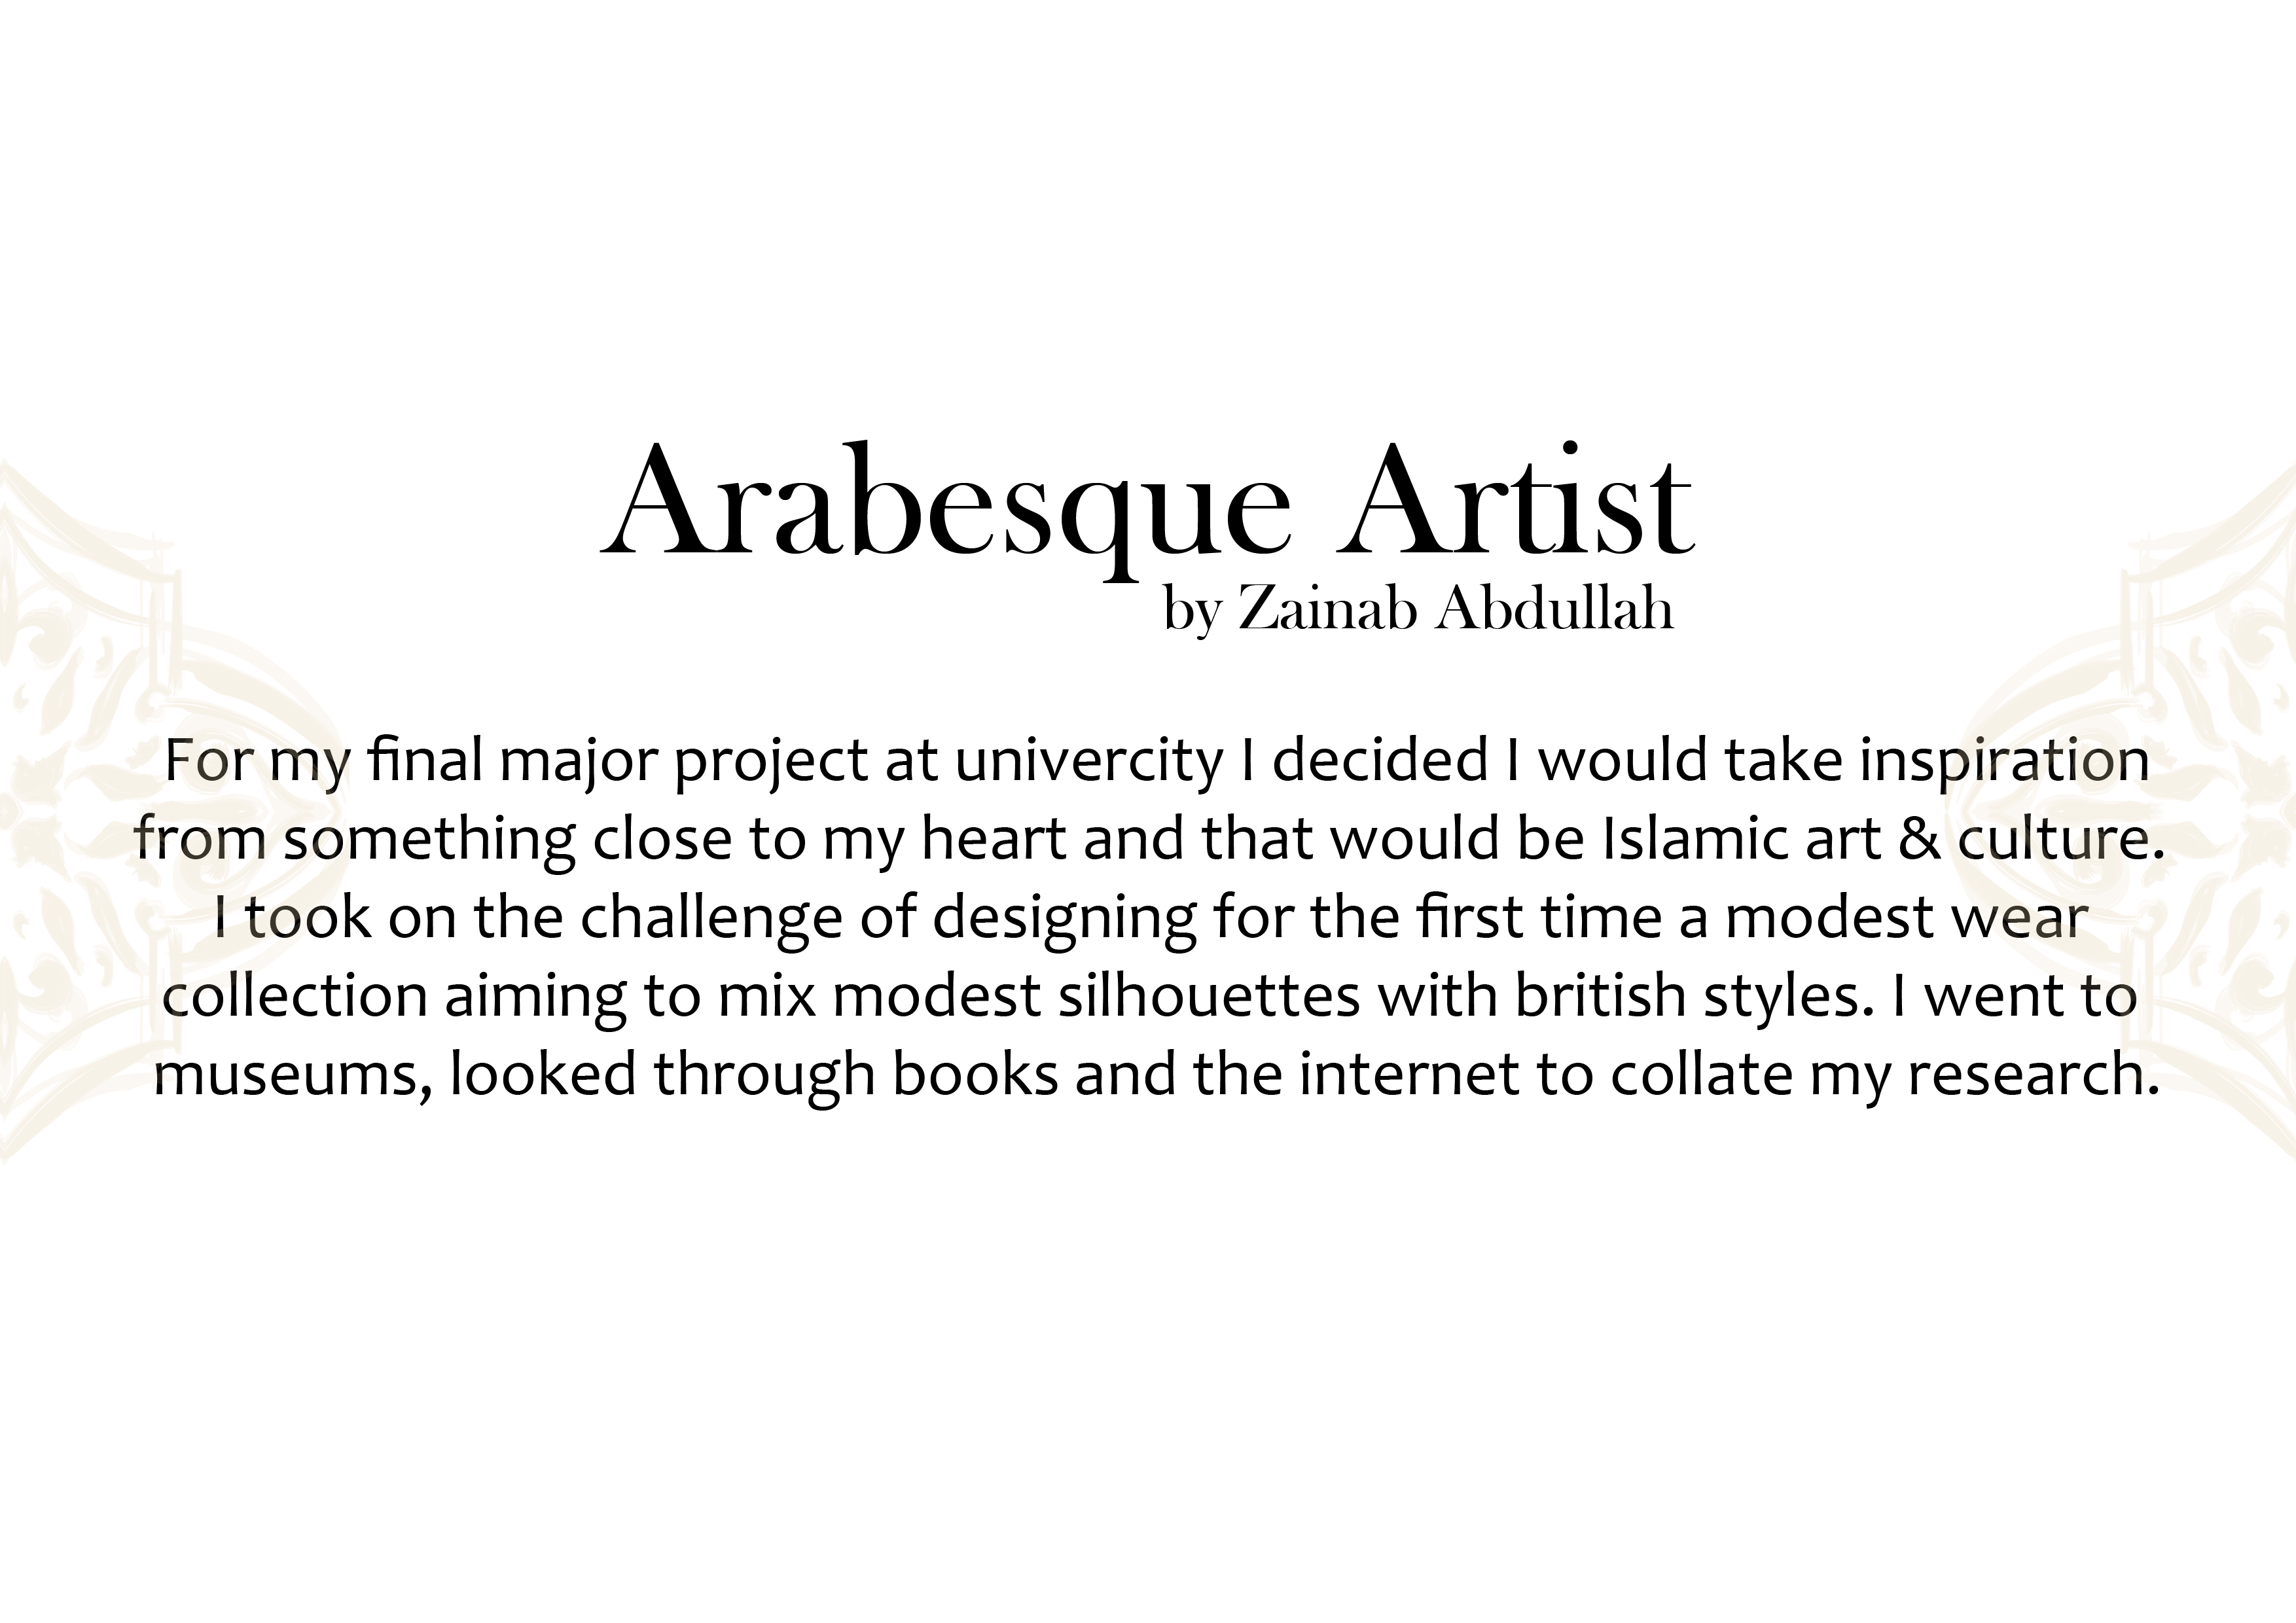 Arabesque Artist

by Zamab Abdullah

For my final major project at univercity | decided | would take inspiration
from something close to my heart and that would be Islamic art & culture.
| took on the challenge of designing for the first time a modest wear
collection aiming to mix modest silhouettes with british styles. | went to
museums, looked through books and the internet to collate my research.